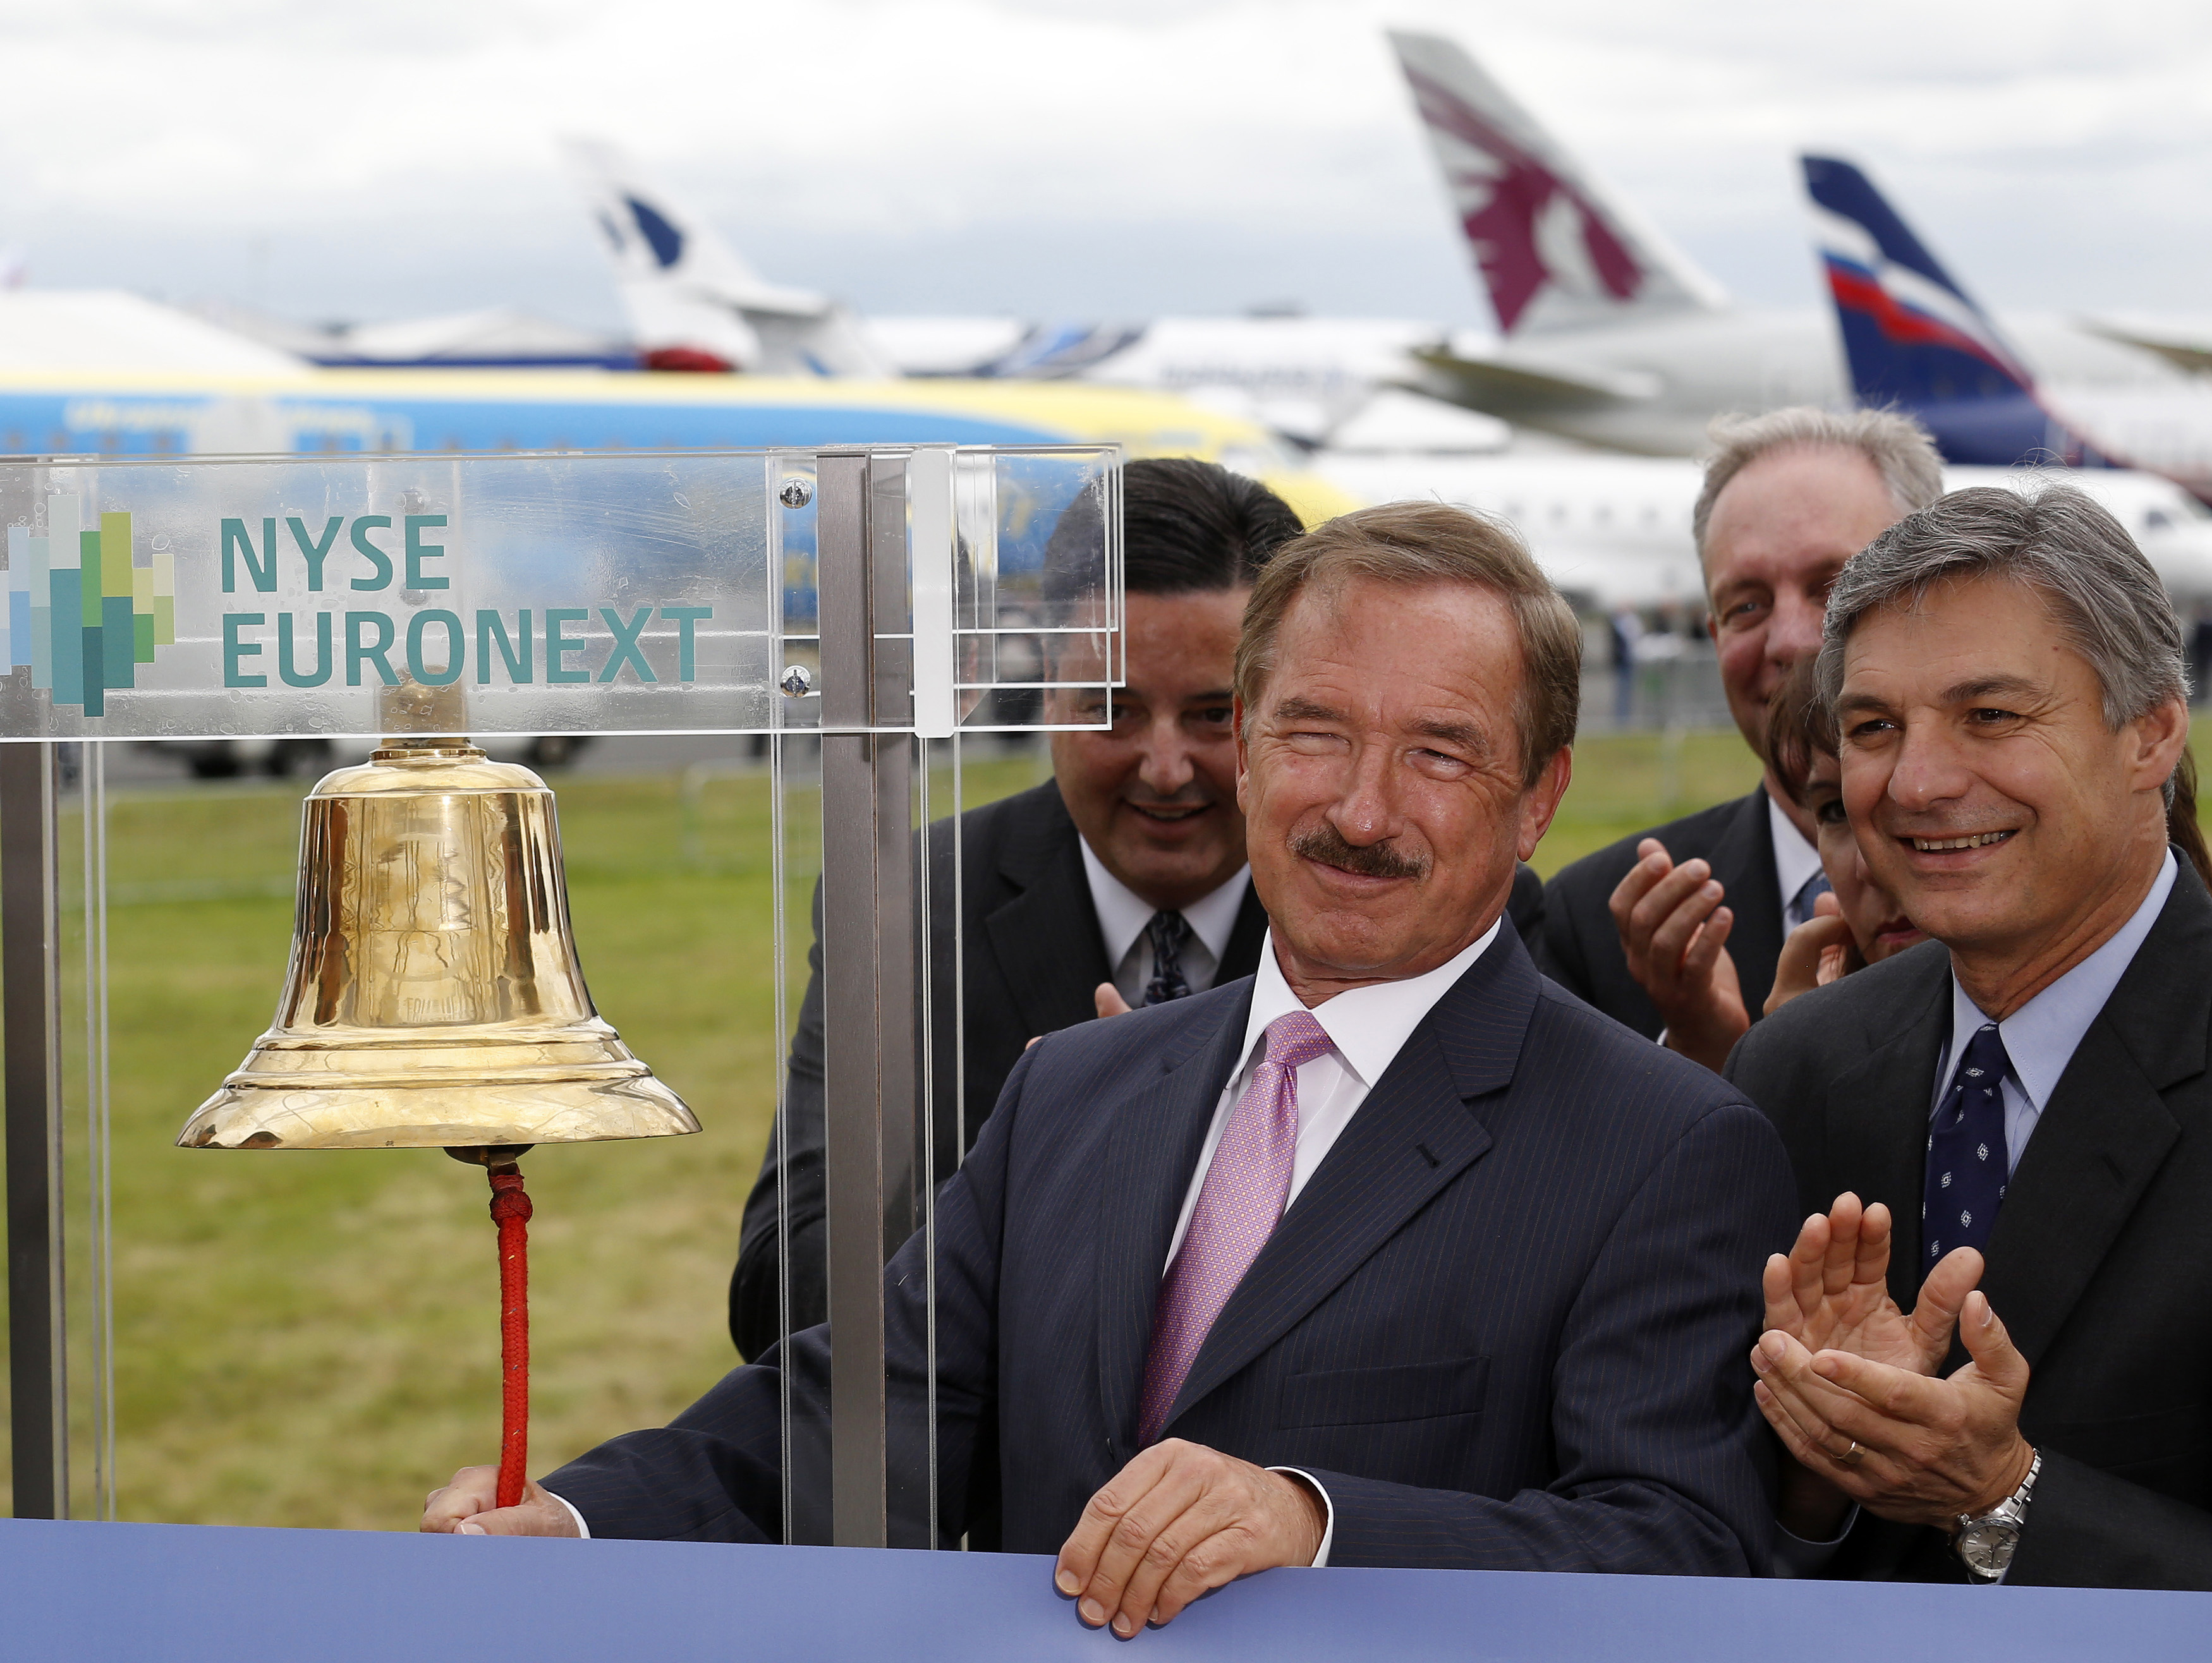 CEO of Air Lease Corp. Steven Udvar-Hazy rings the New York Stock Exchange bell alongside CEO of Boeing Commercial Airplanes Ray Conner at the Farnborough Airshow 2012 in southern England